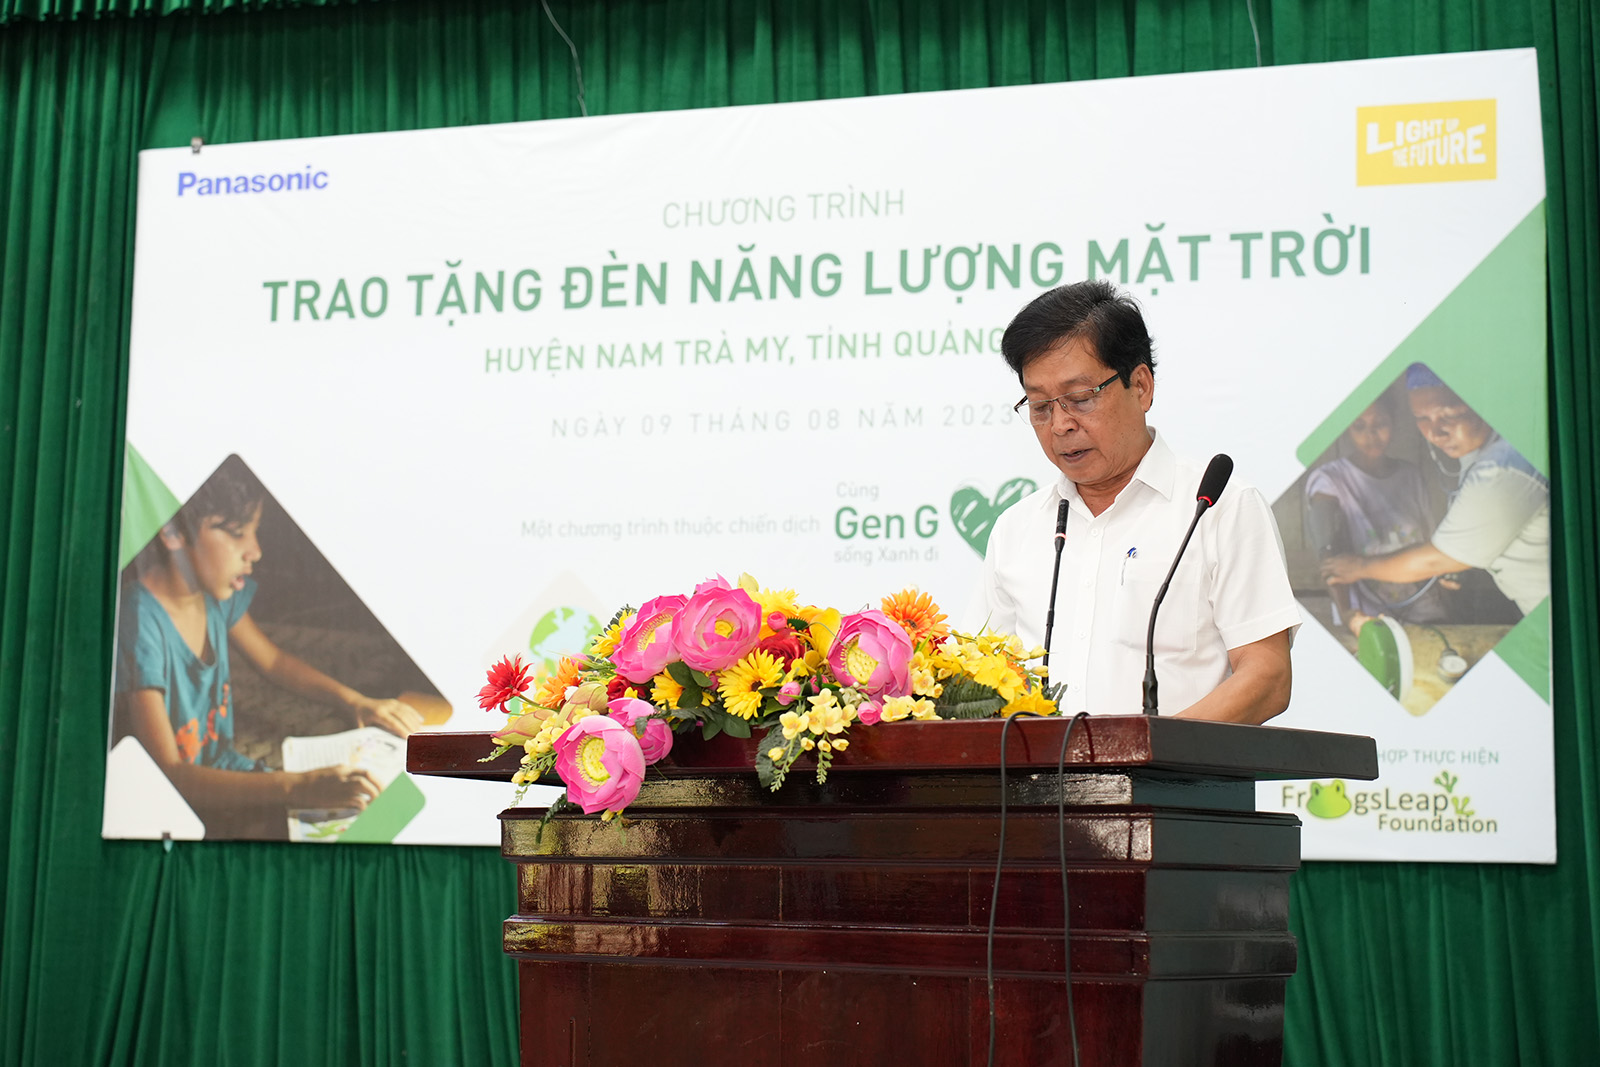 Photo: Mr. Tran Duy Dung sharing his appreciation at the solar lantern donation event